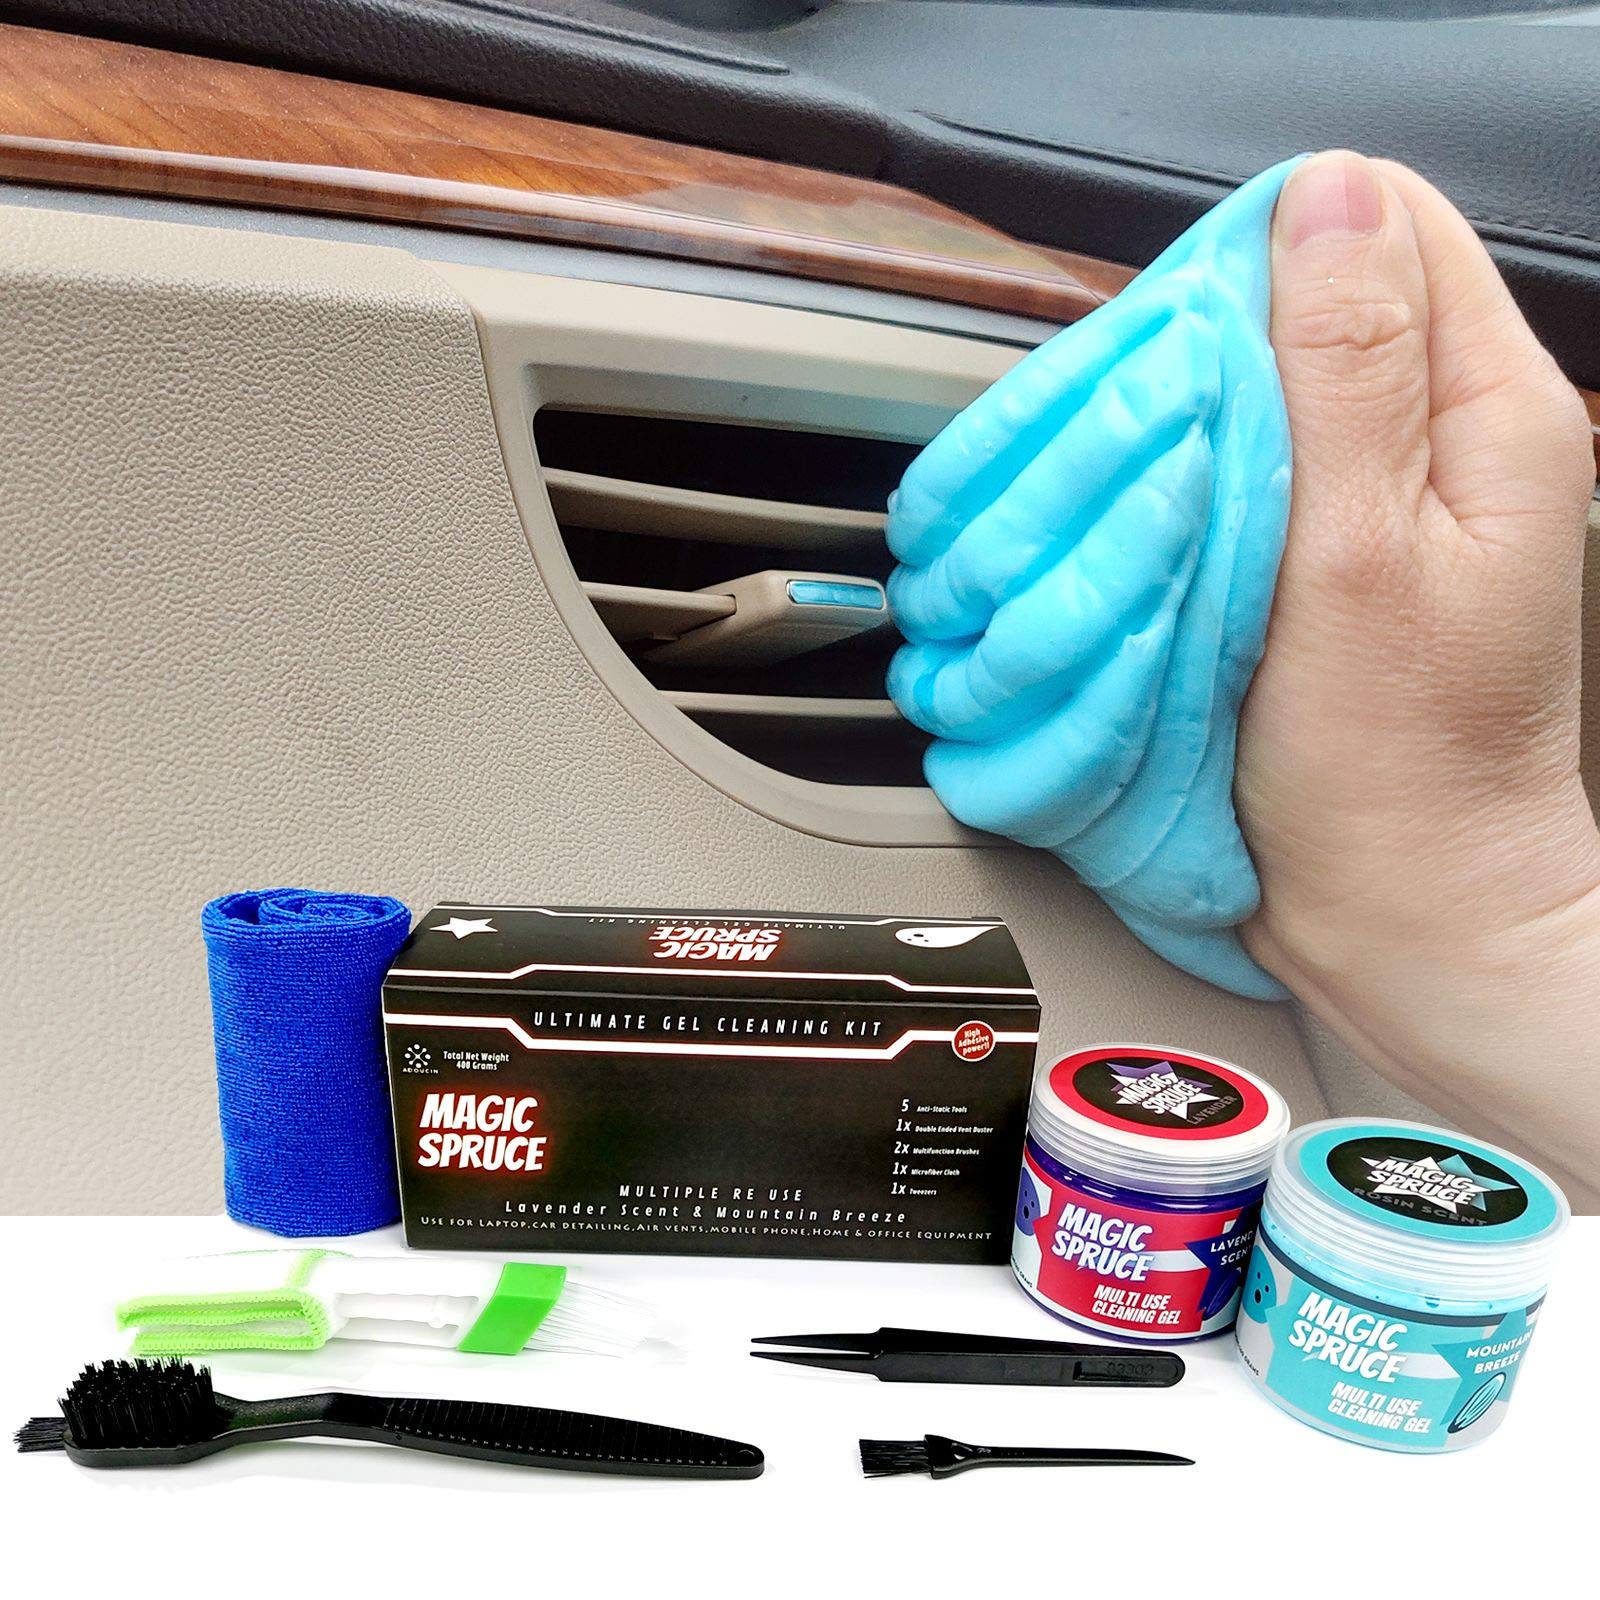 ToysButty car cleaning gel Kit Supplies for car Interior Detailing, 2 Pots  car Slime cleaner, 4 Anti-Static Detailing Brushes, V